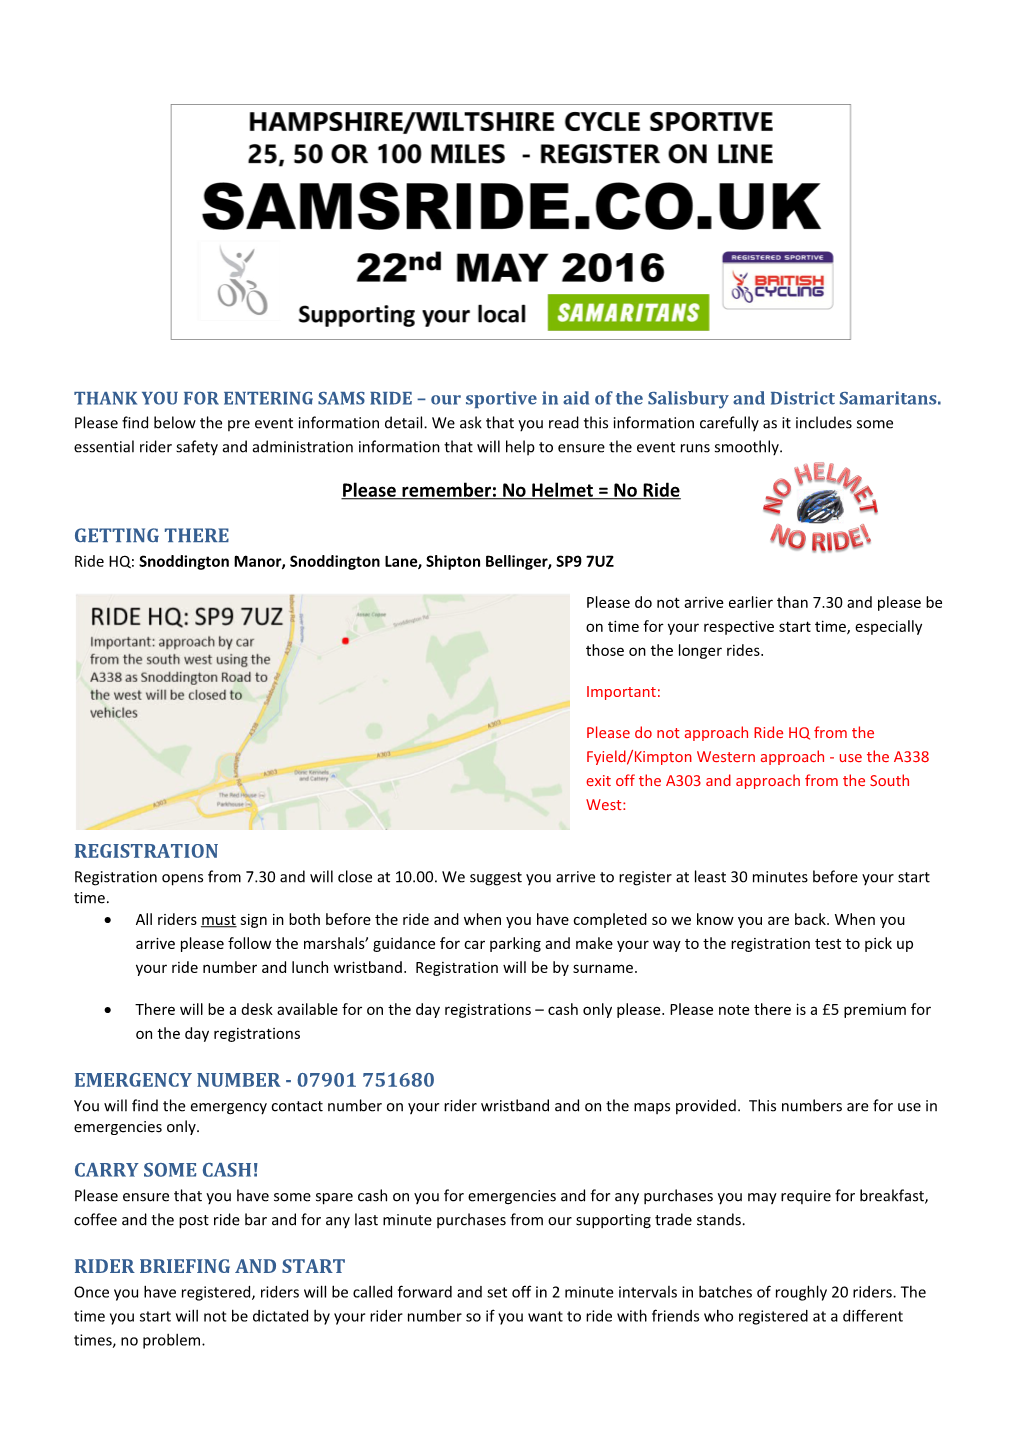 THANK YOU for ENTERING SAMS RIDE Our Sportive in Aid of the Salisbury and District Samaritans